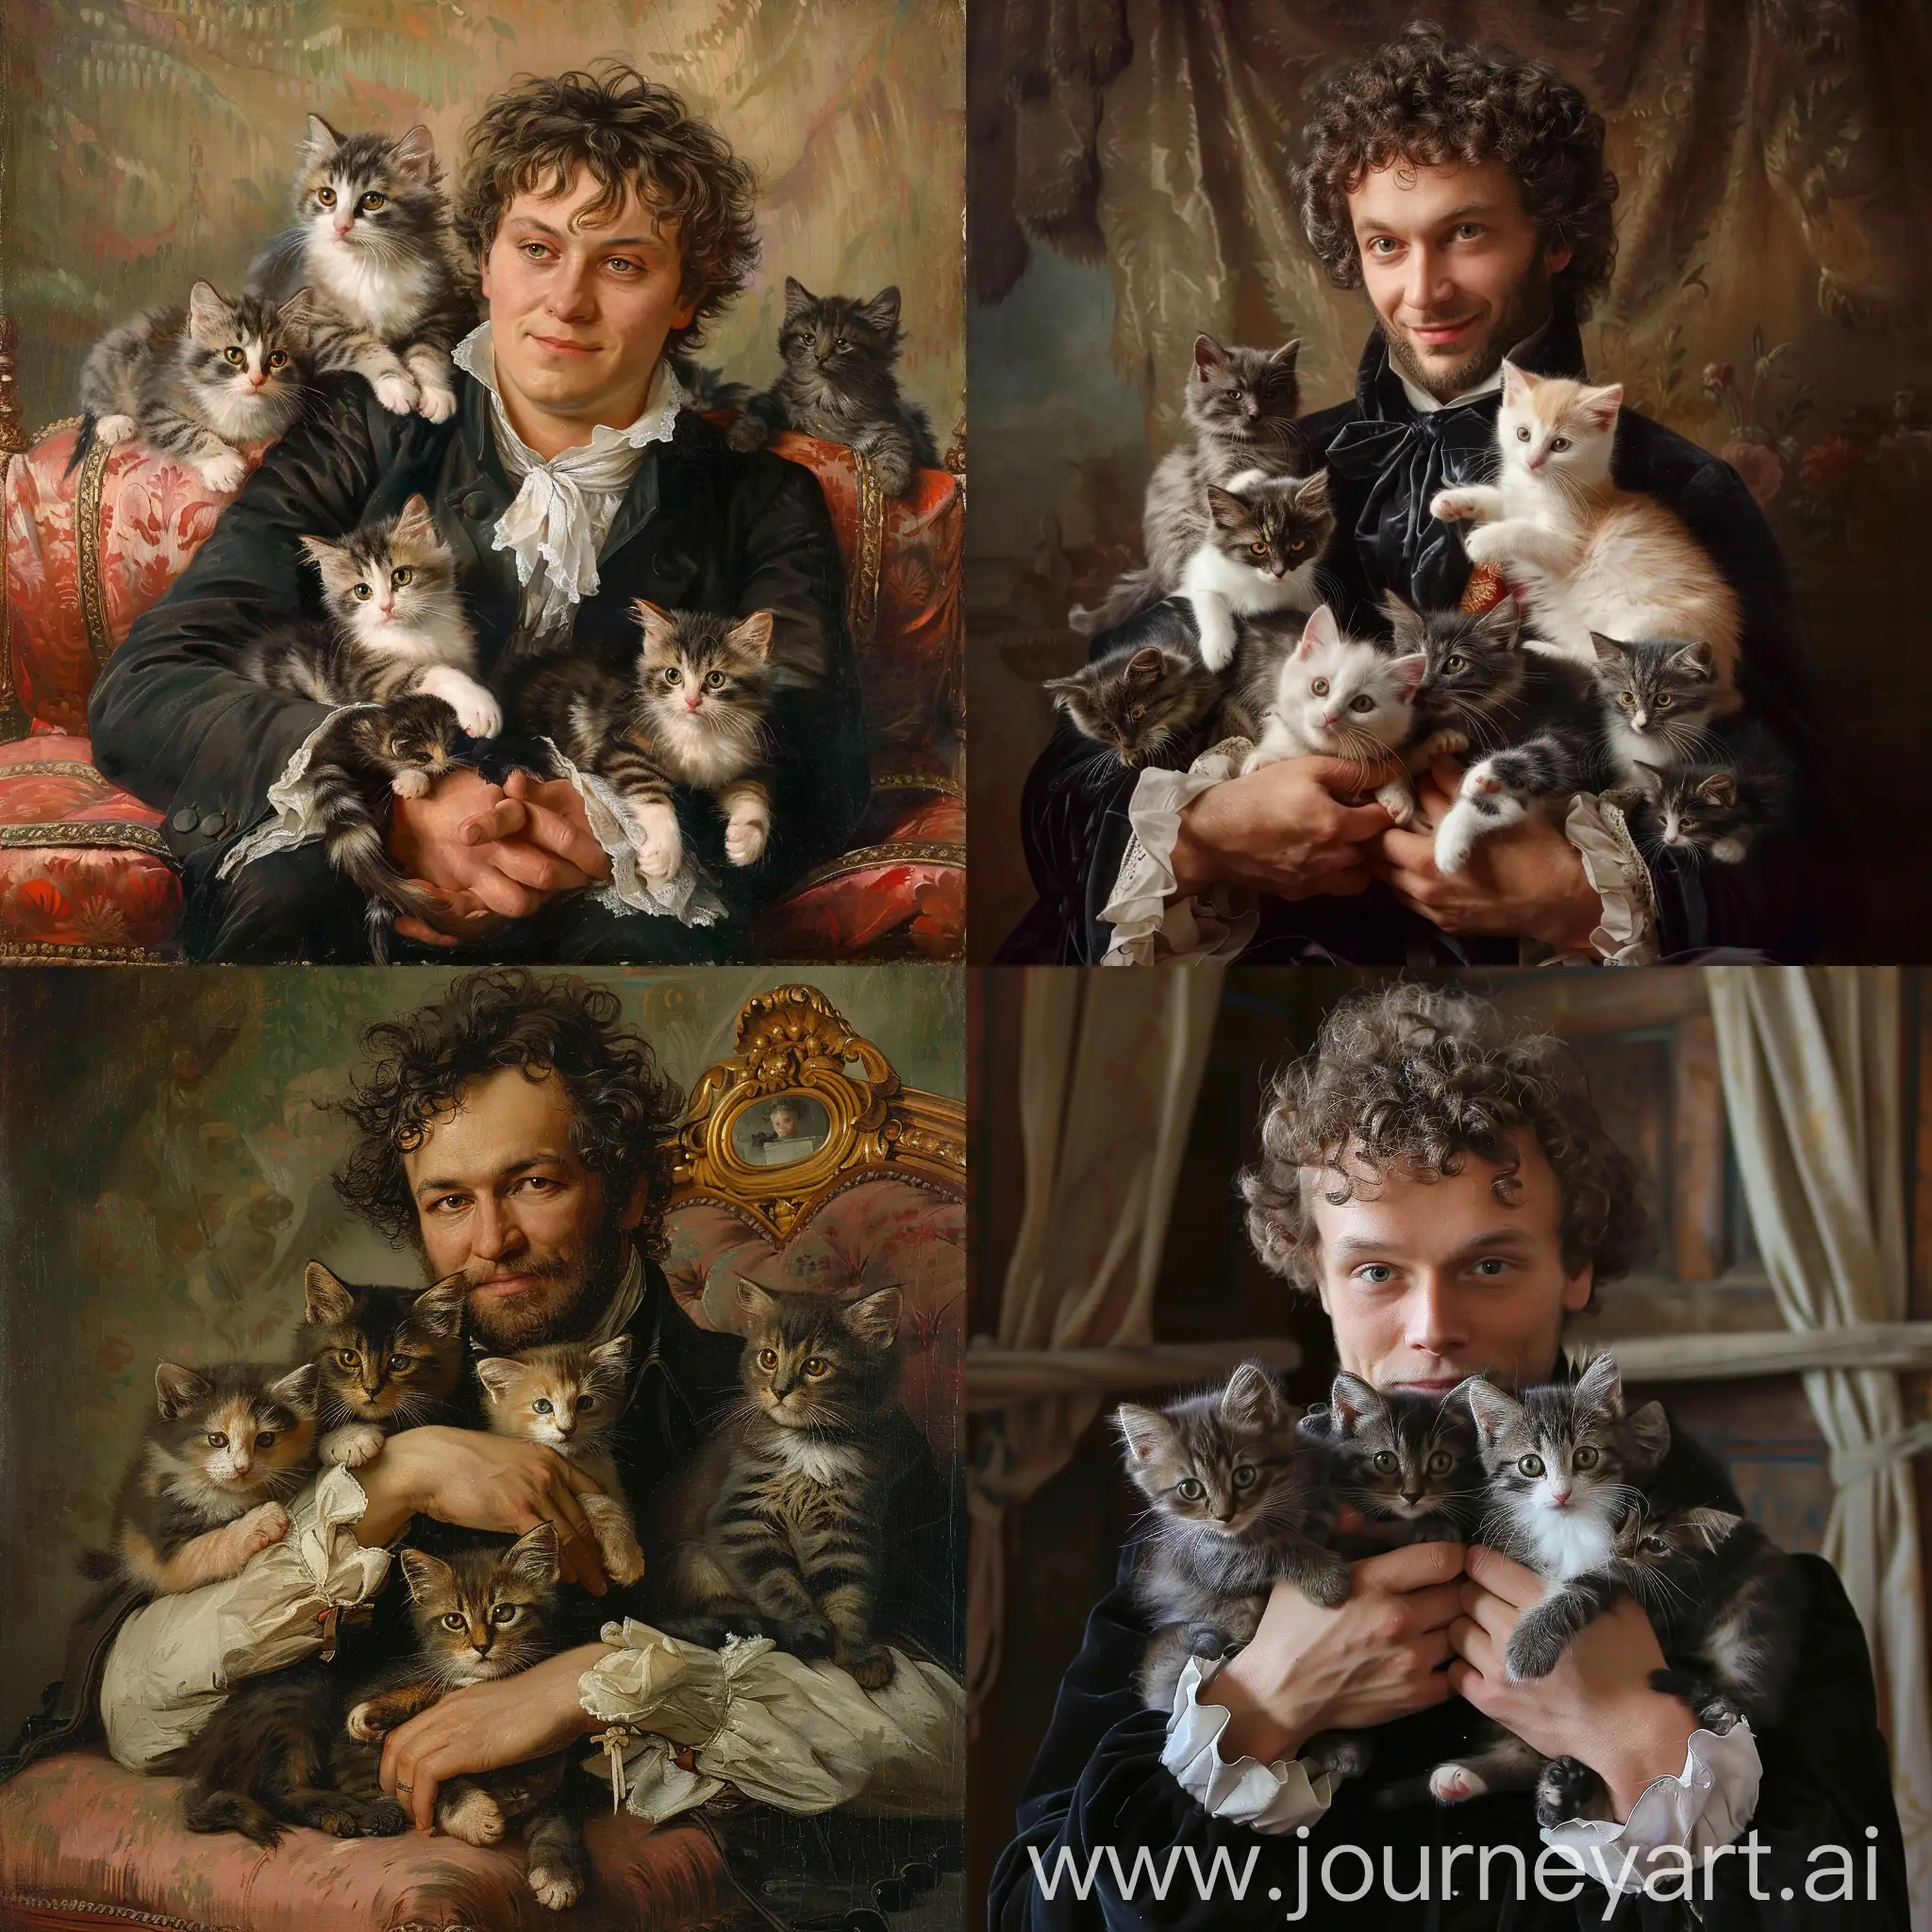 Russian-Poet-Alexander-Pushkin-Embraced-by-Adorable-Fluffy-Kittens